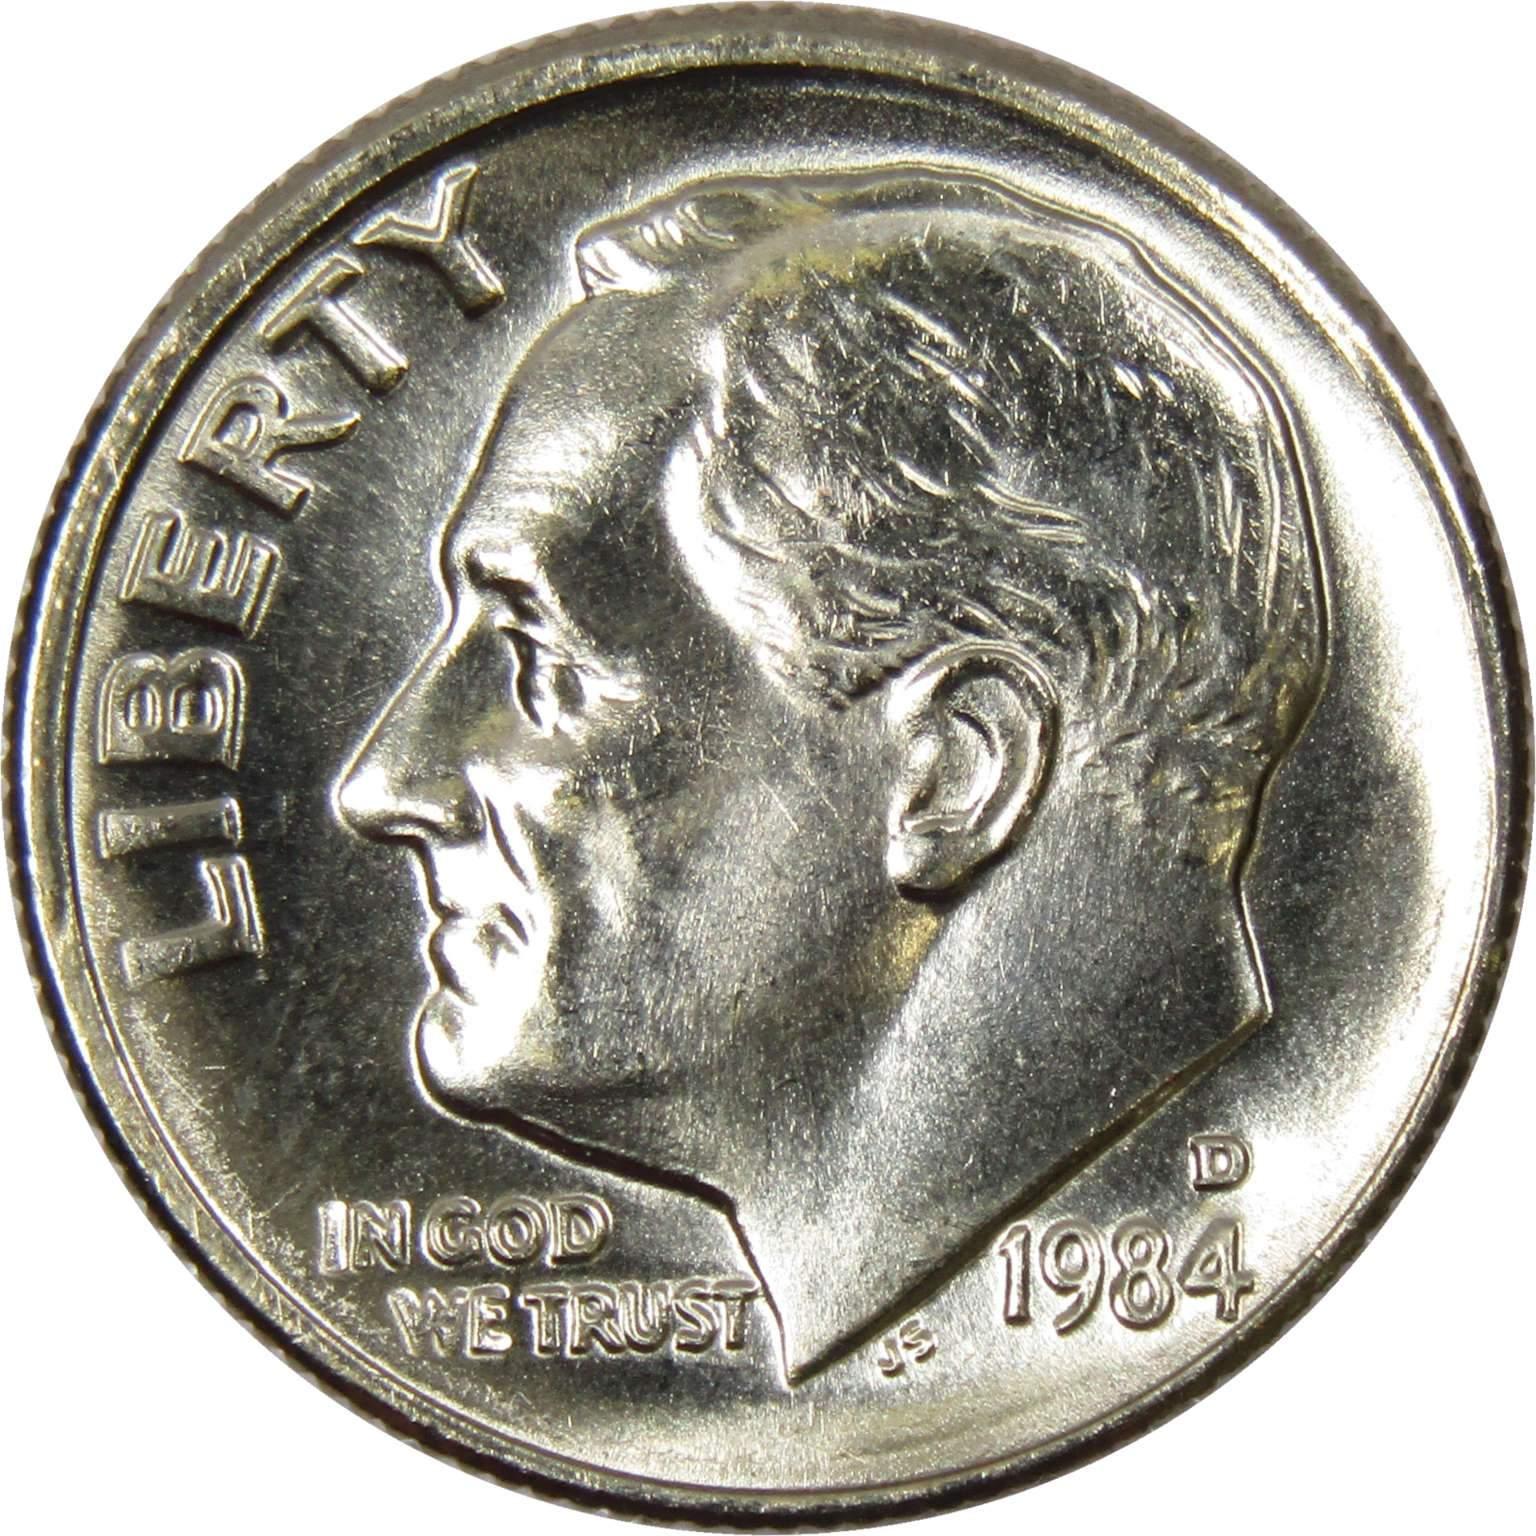 1984 D Roosevelt Dime BU Uncirculated Mint State 10c US Coin Collectible